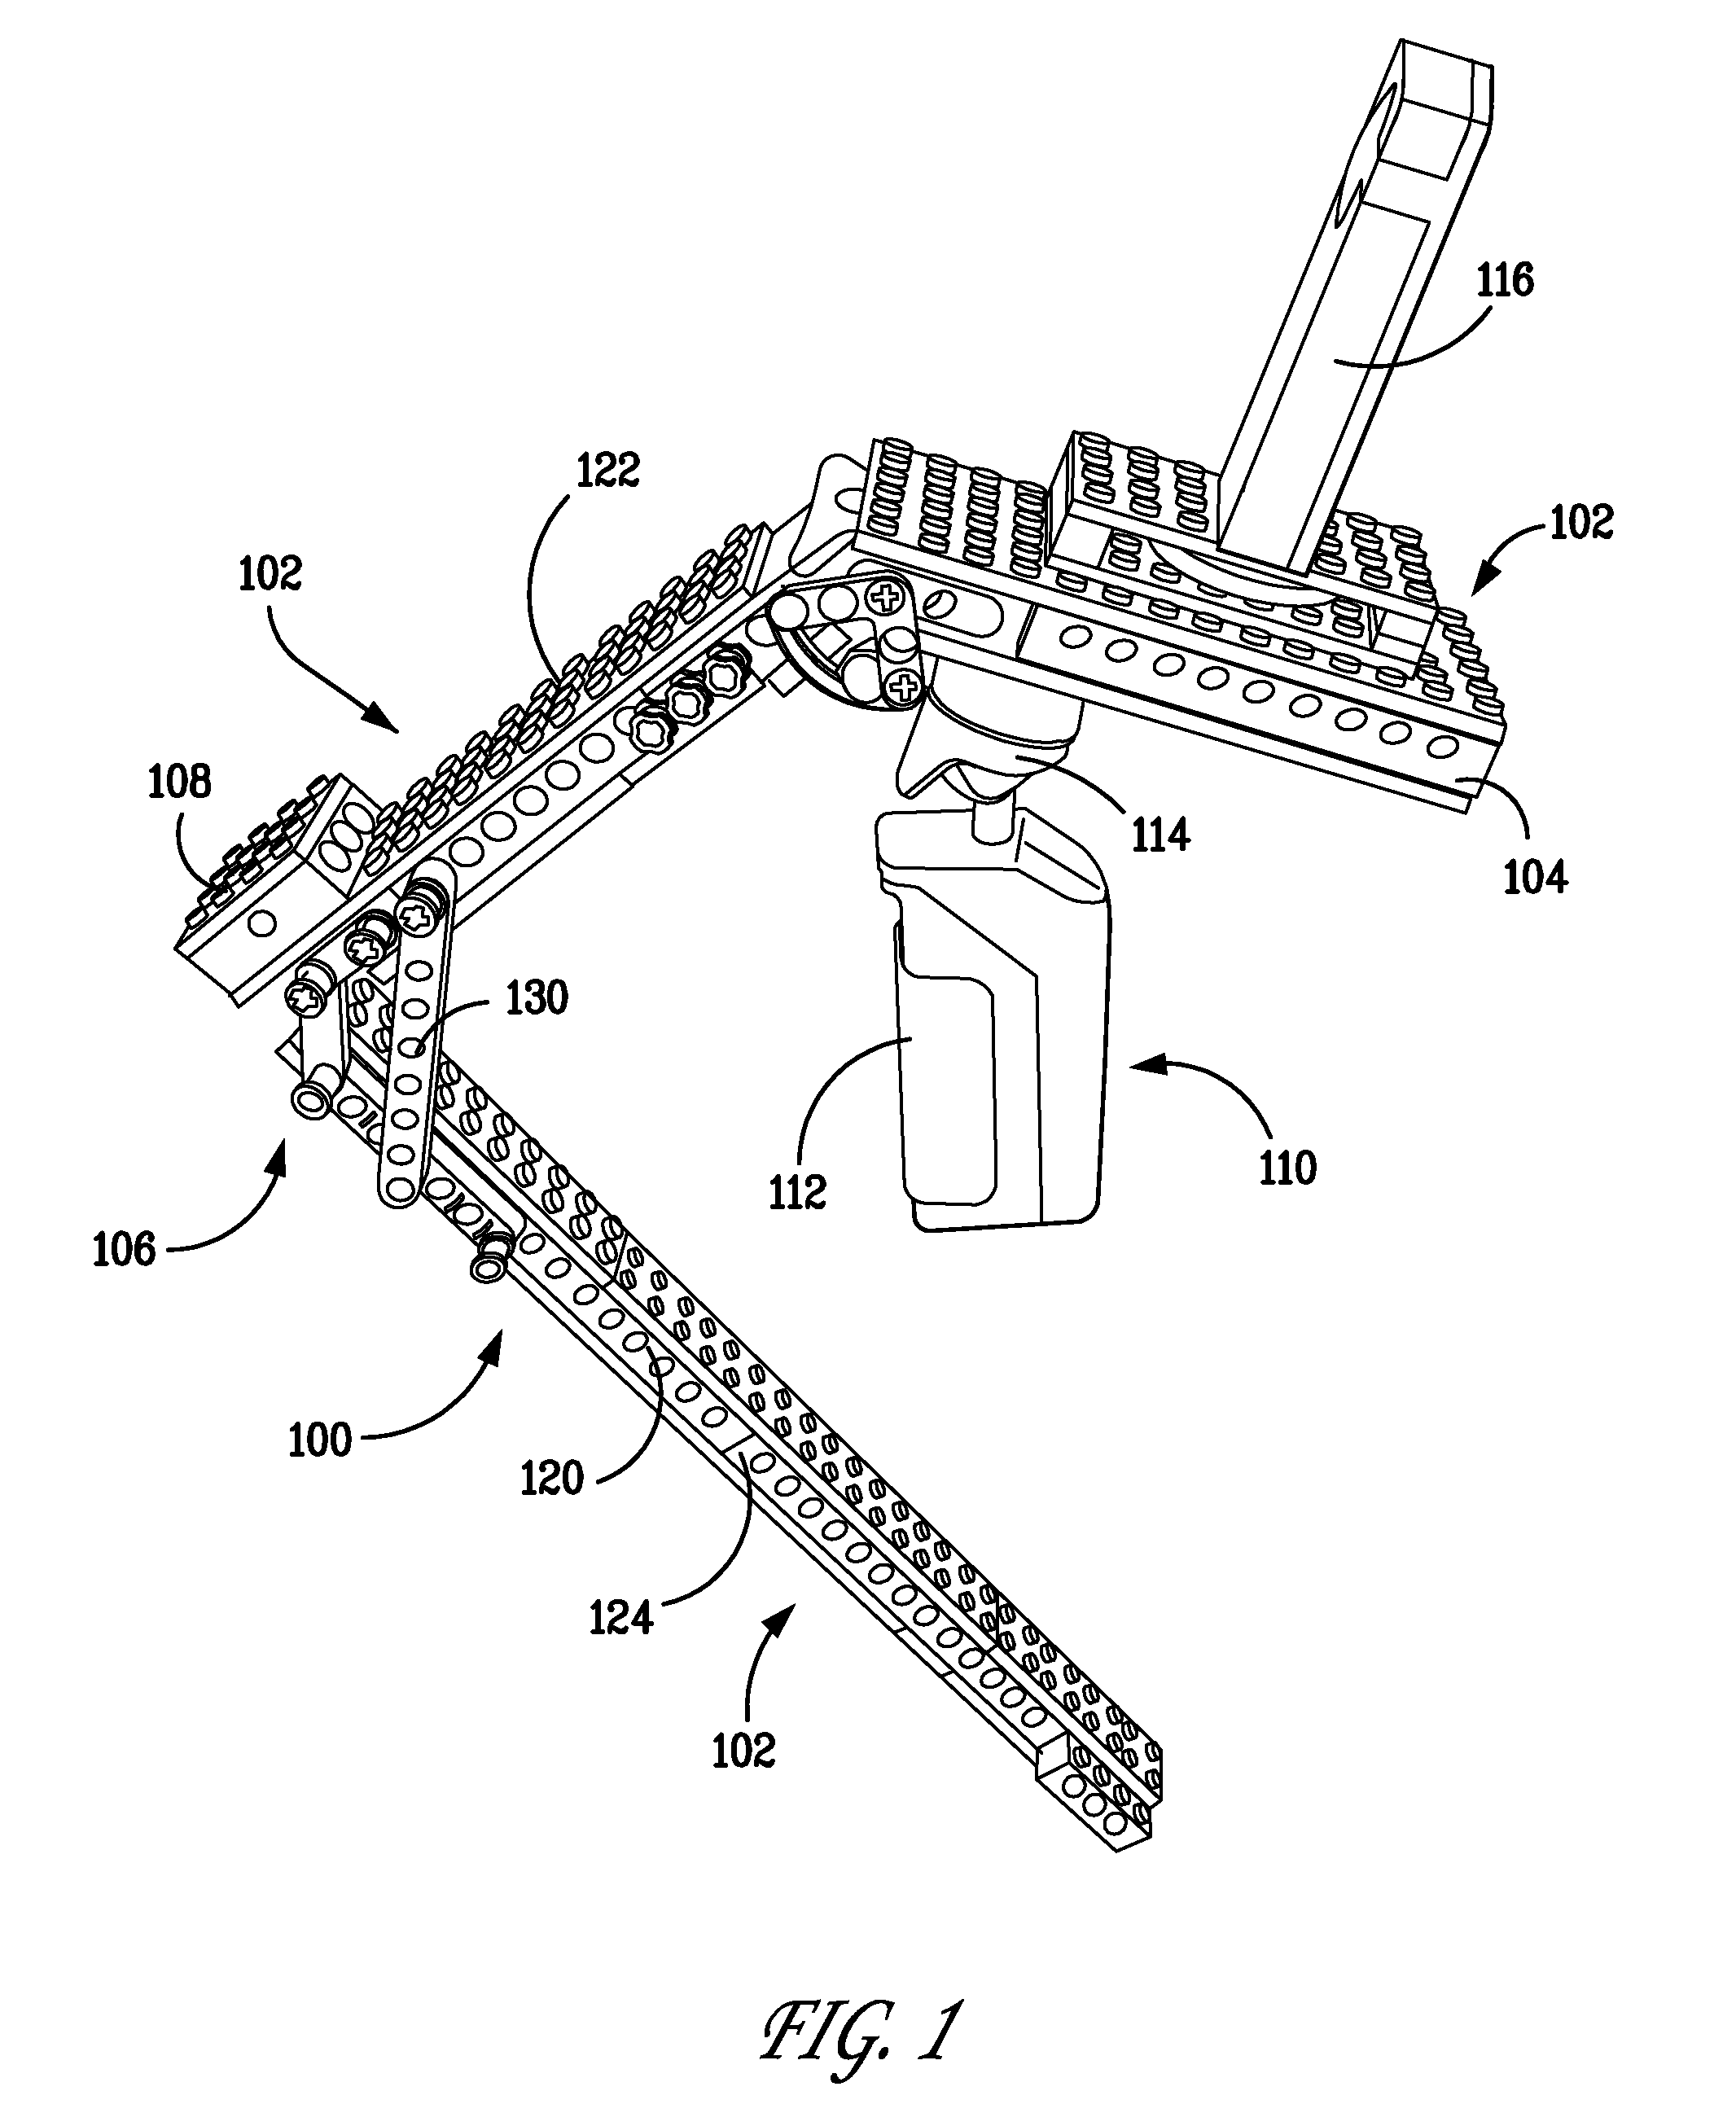 Modular and integrated equipment stabilizing support apparatuses